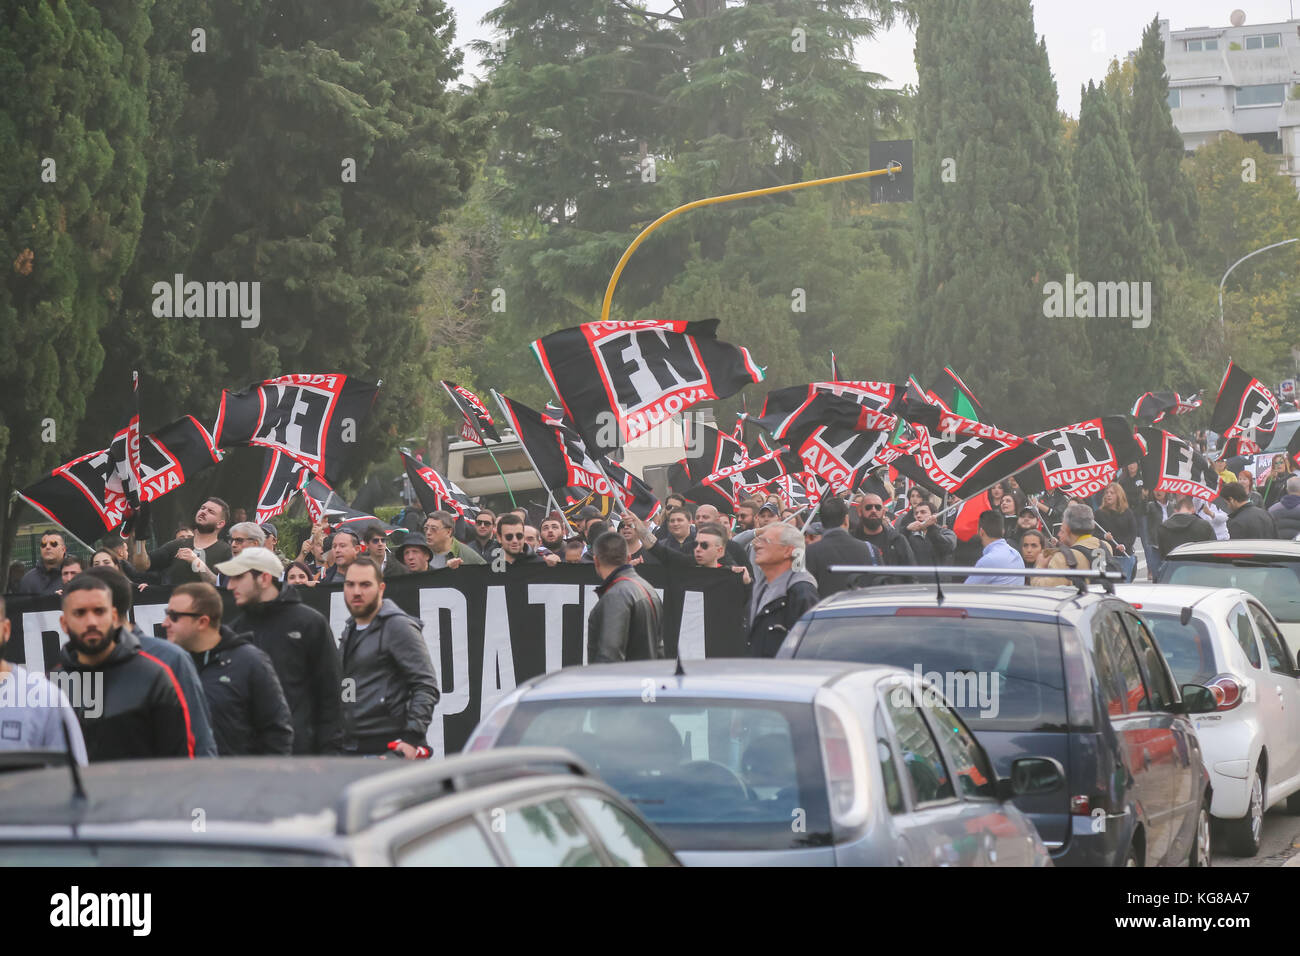 Rome, Italy 4 November 2017. Demonstration of the political movement called 'Forza Nuova' held in Rome in the EUR zone on 04 November 2017. Rome, Italy 4 November 2017 Credit: Simone De Santis / Alamy Live News Stock Photo